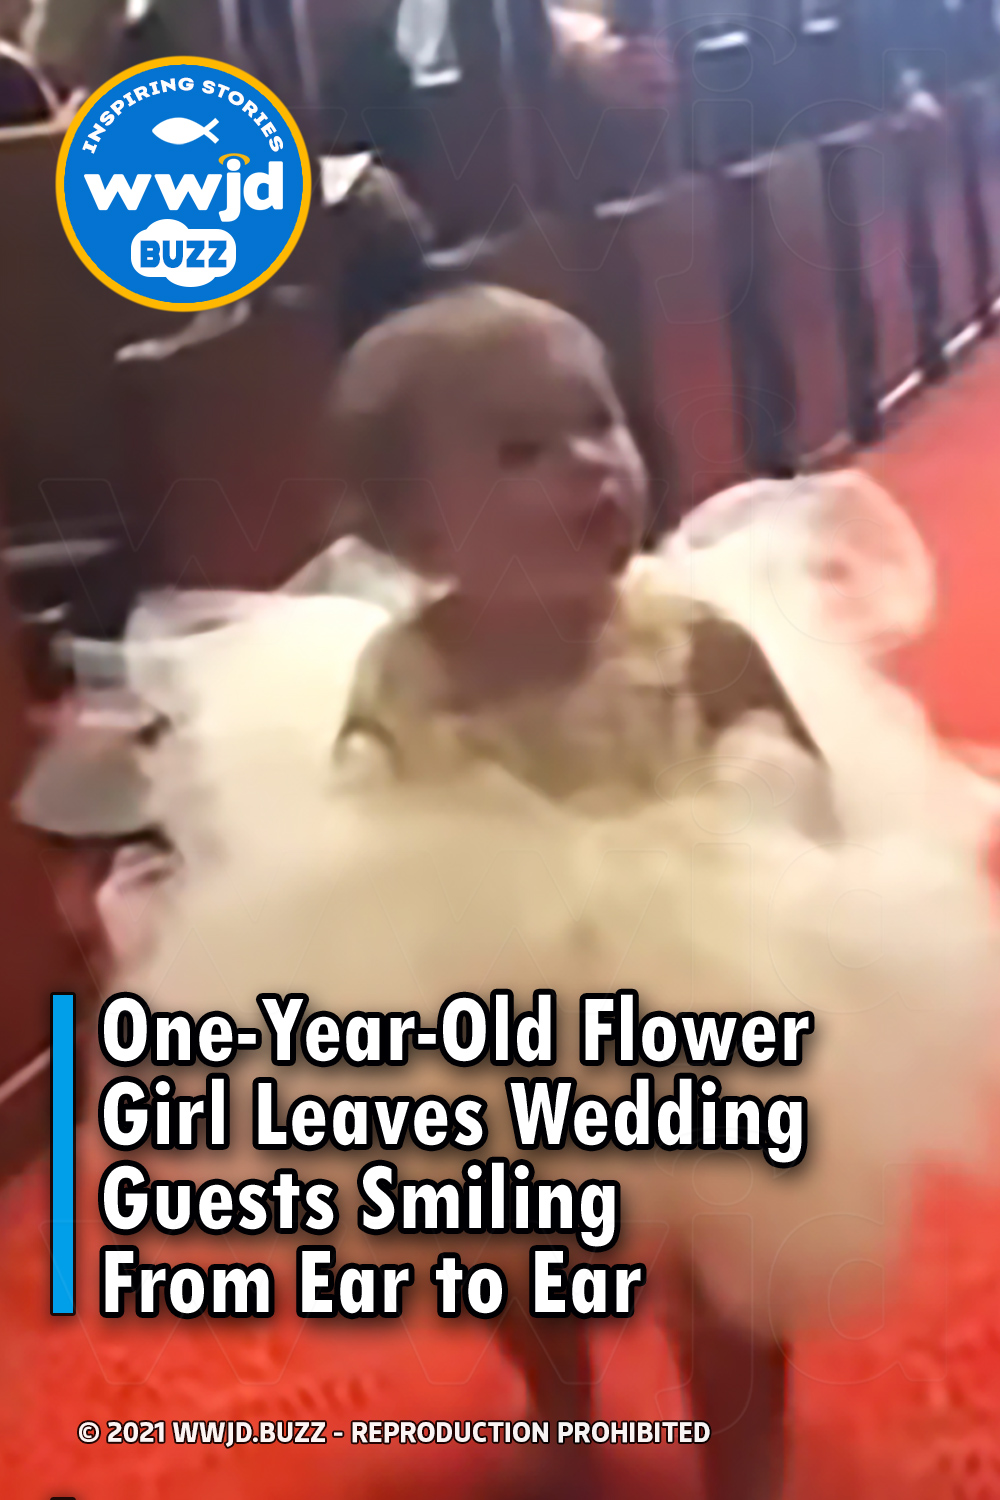 One-Year-Old Flower Girl Leaves Wedding Guests Smiling From Ear to Ear